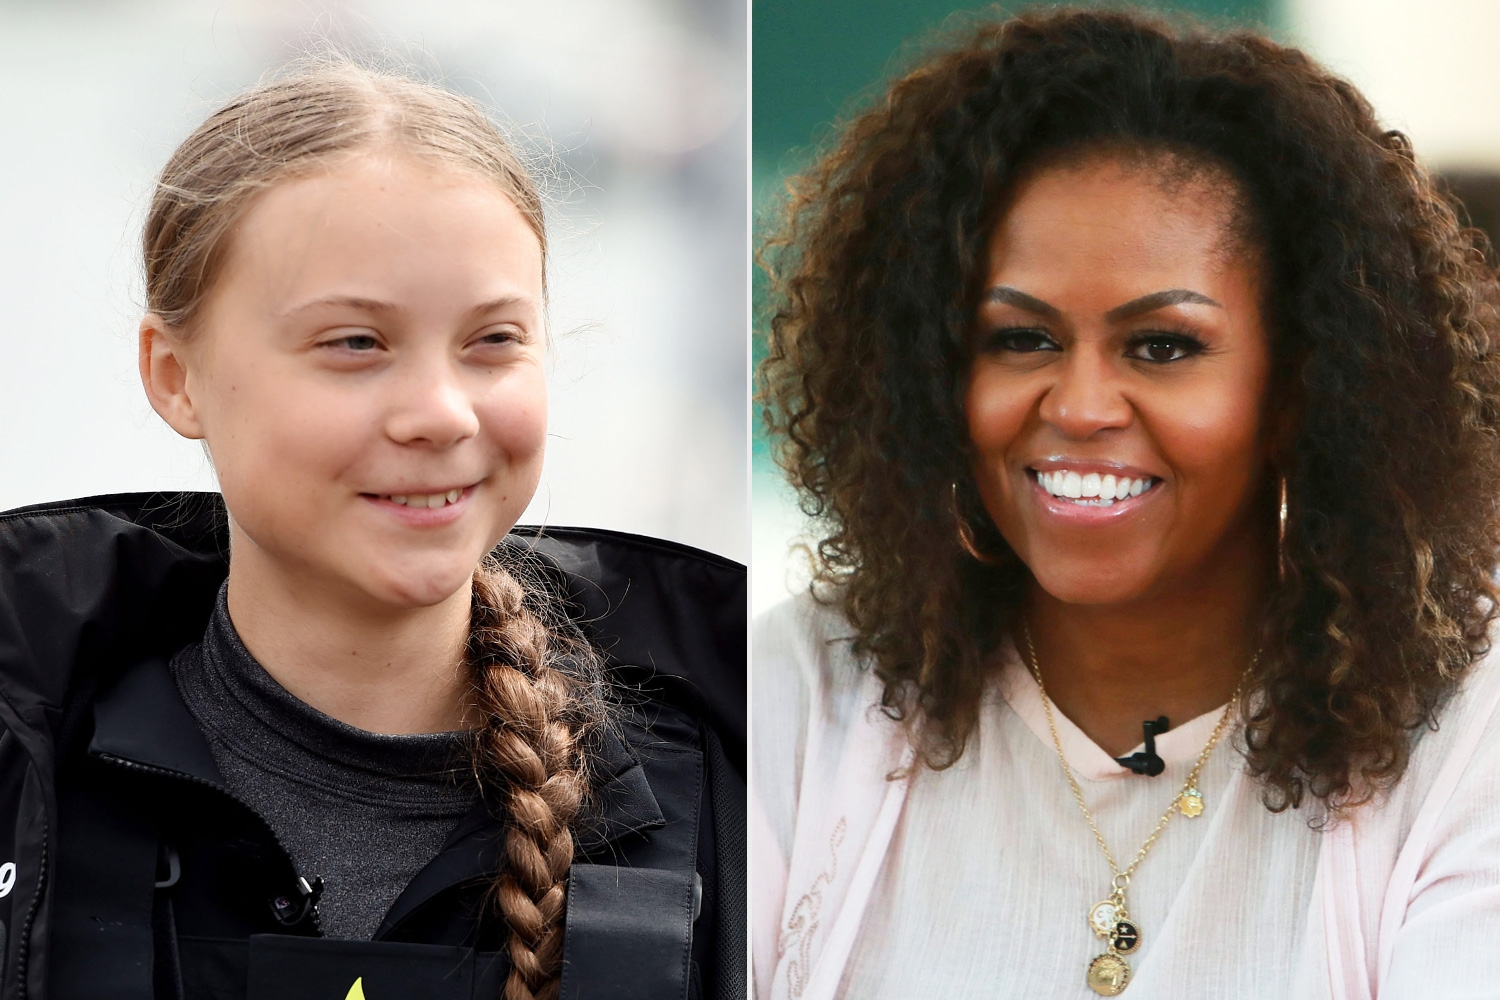 Michelle Obama tells Greta Thunberg ‘don’t let anyone dim your light’ after Trump’s tweet